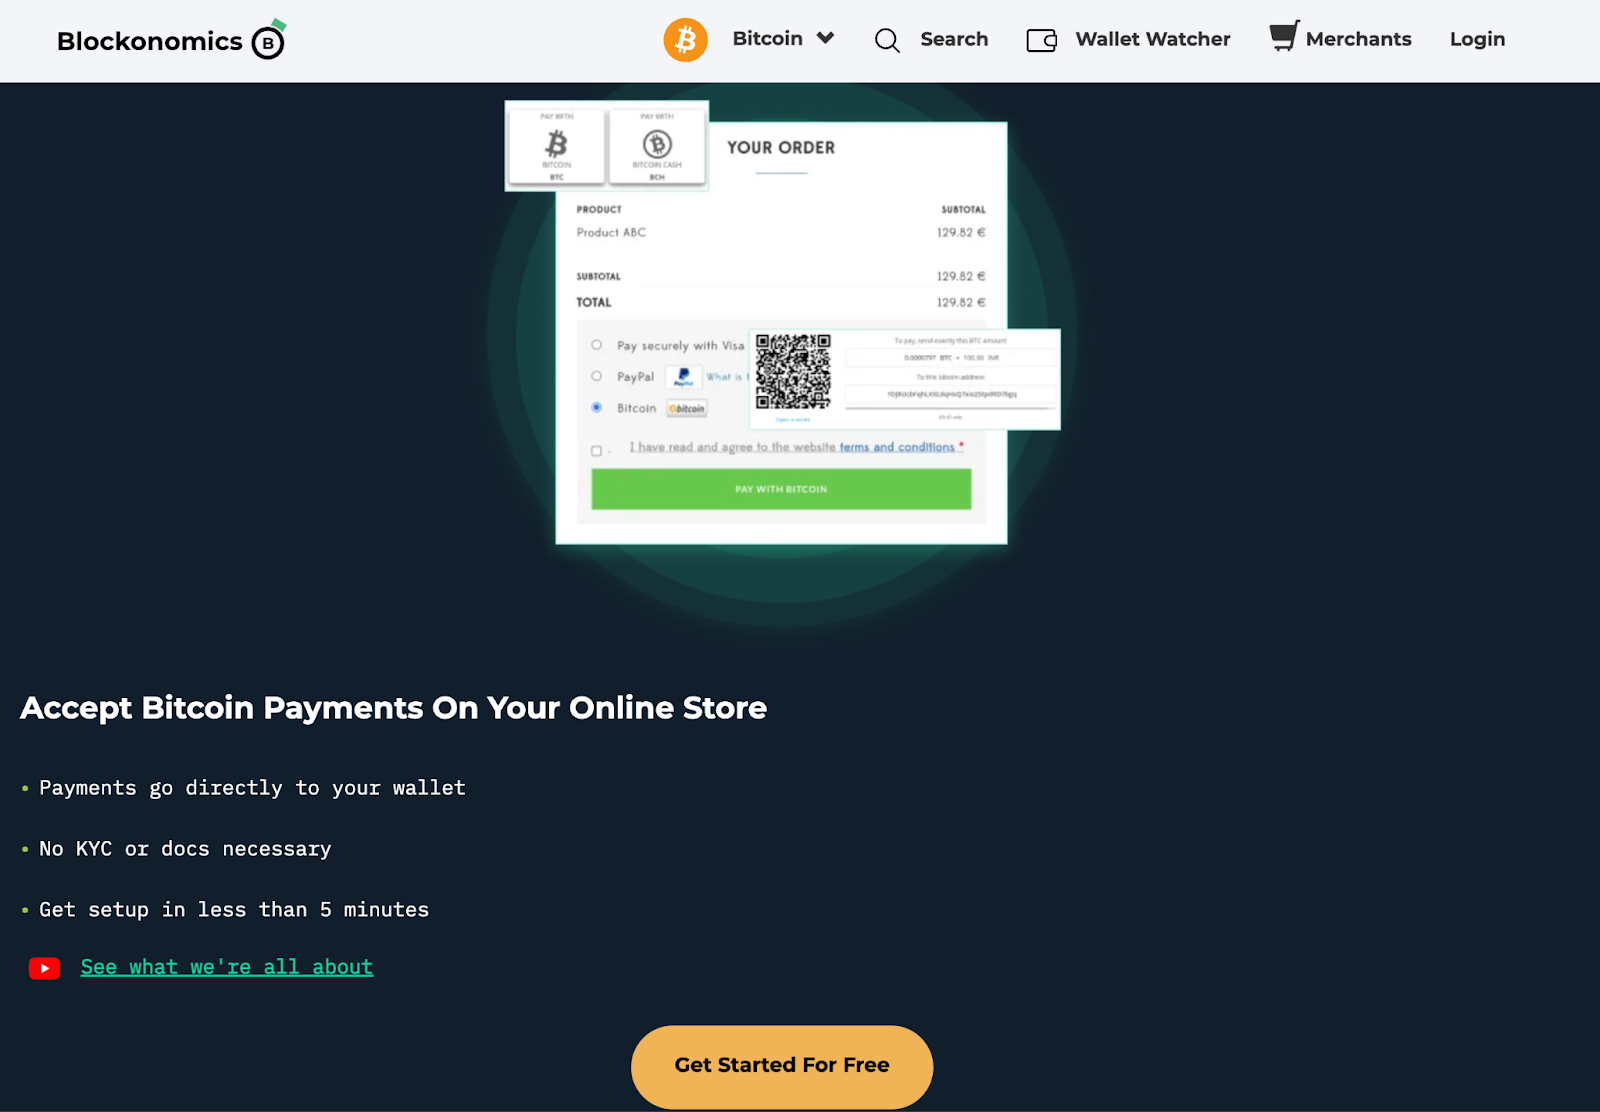 Shopify Meets Bitcoin: How to Accept Bitcoin on Shopify